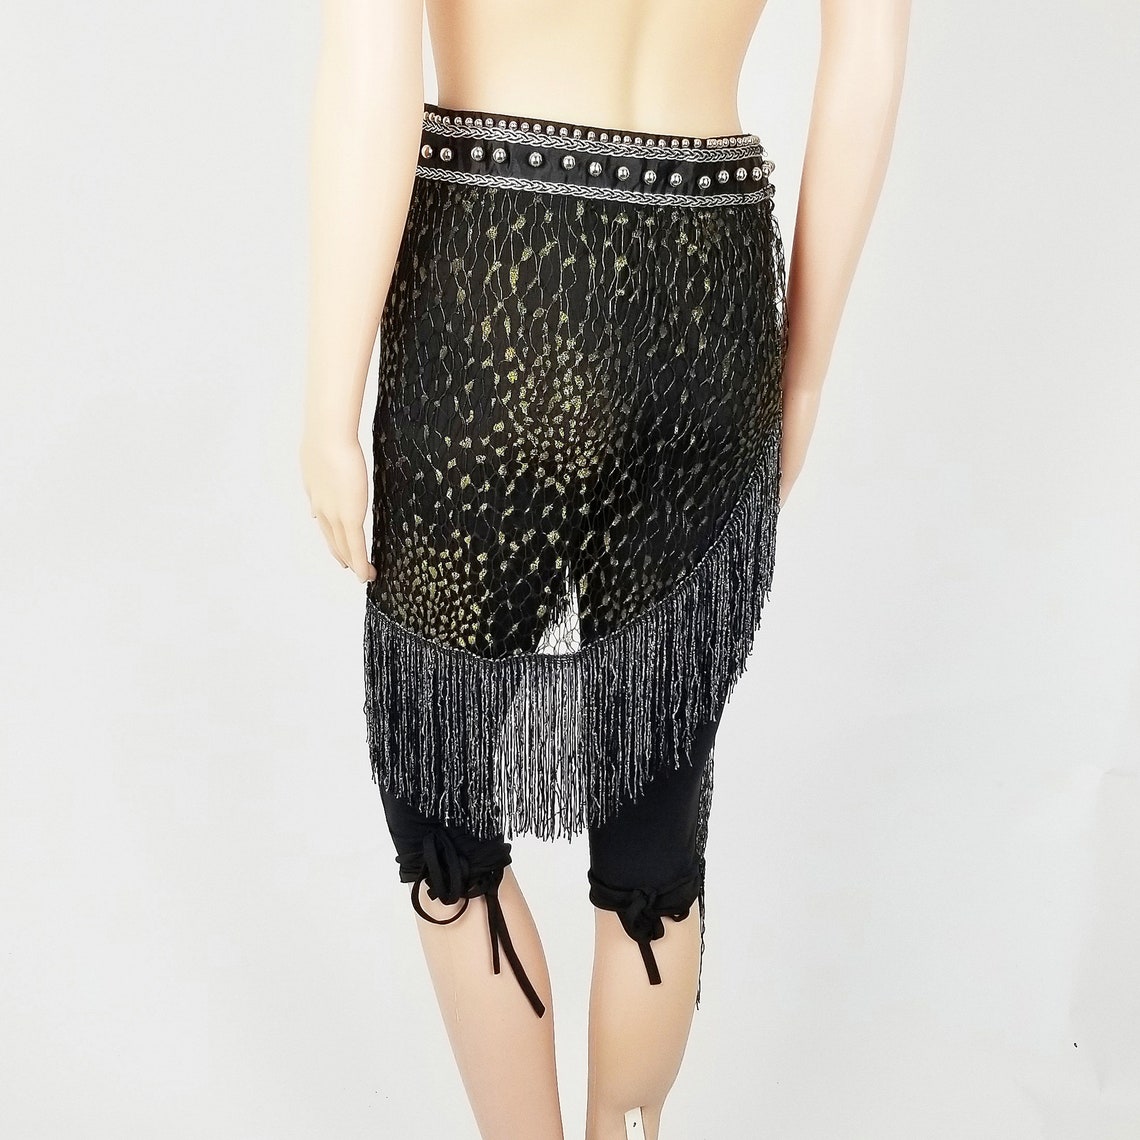 Tribal Mesh Wrap With Metallic Studs Belly Dance Hip Scarf - Etsy